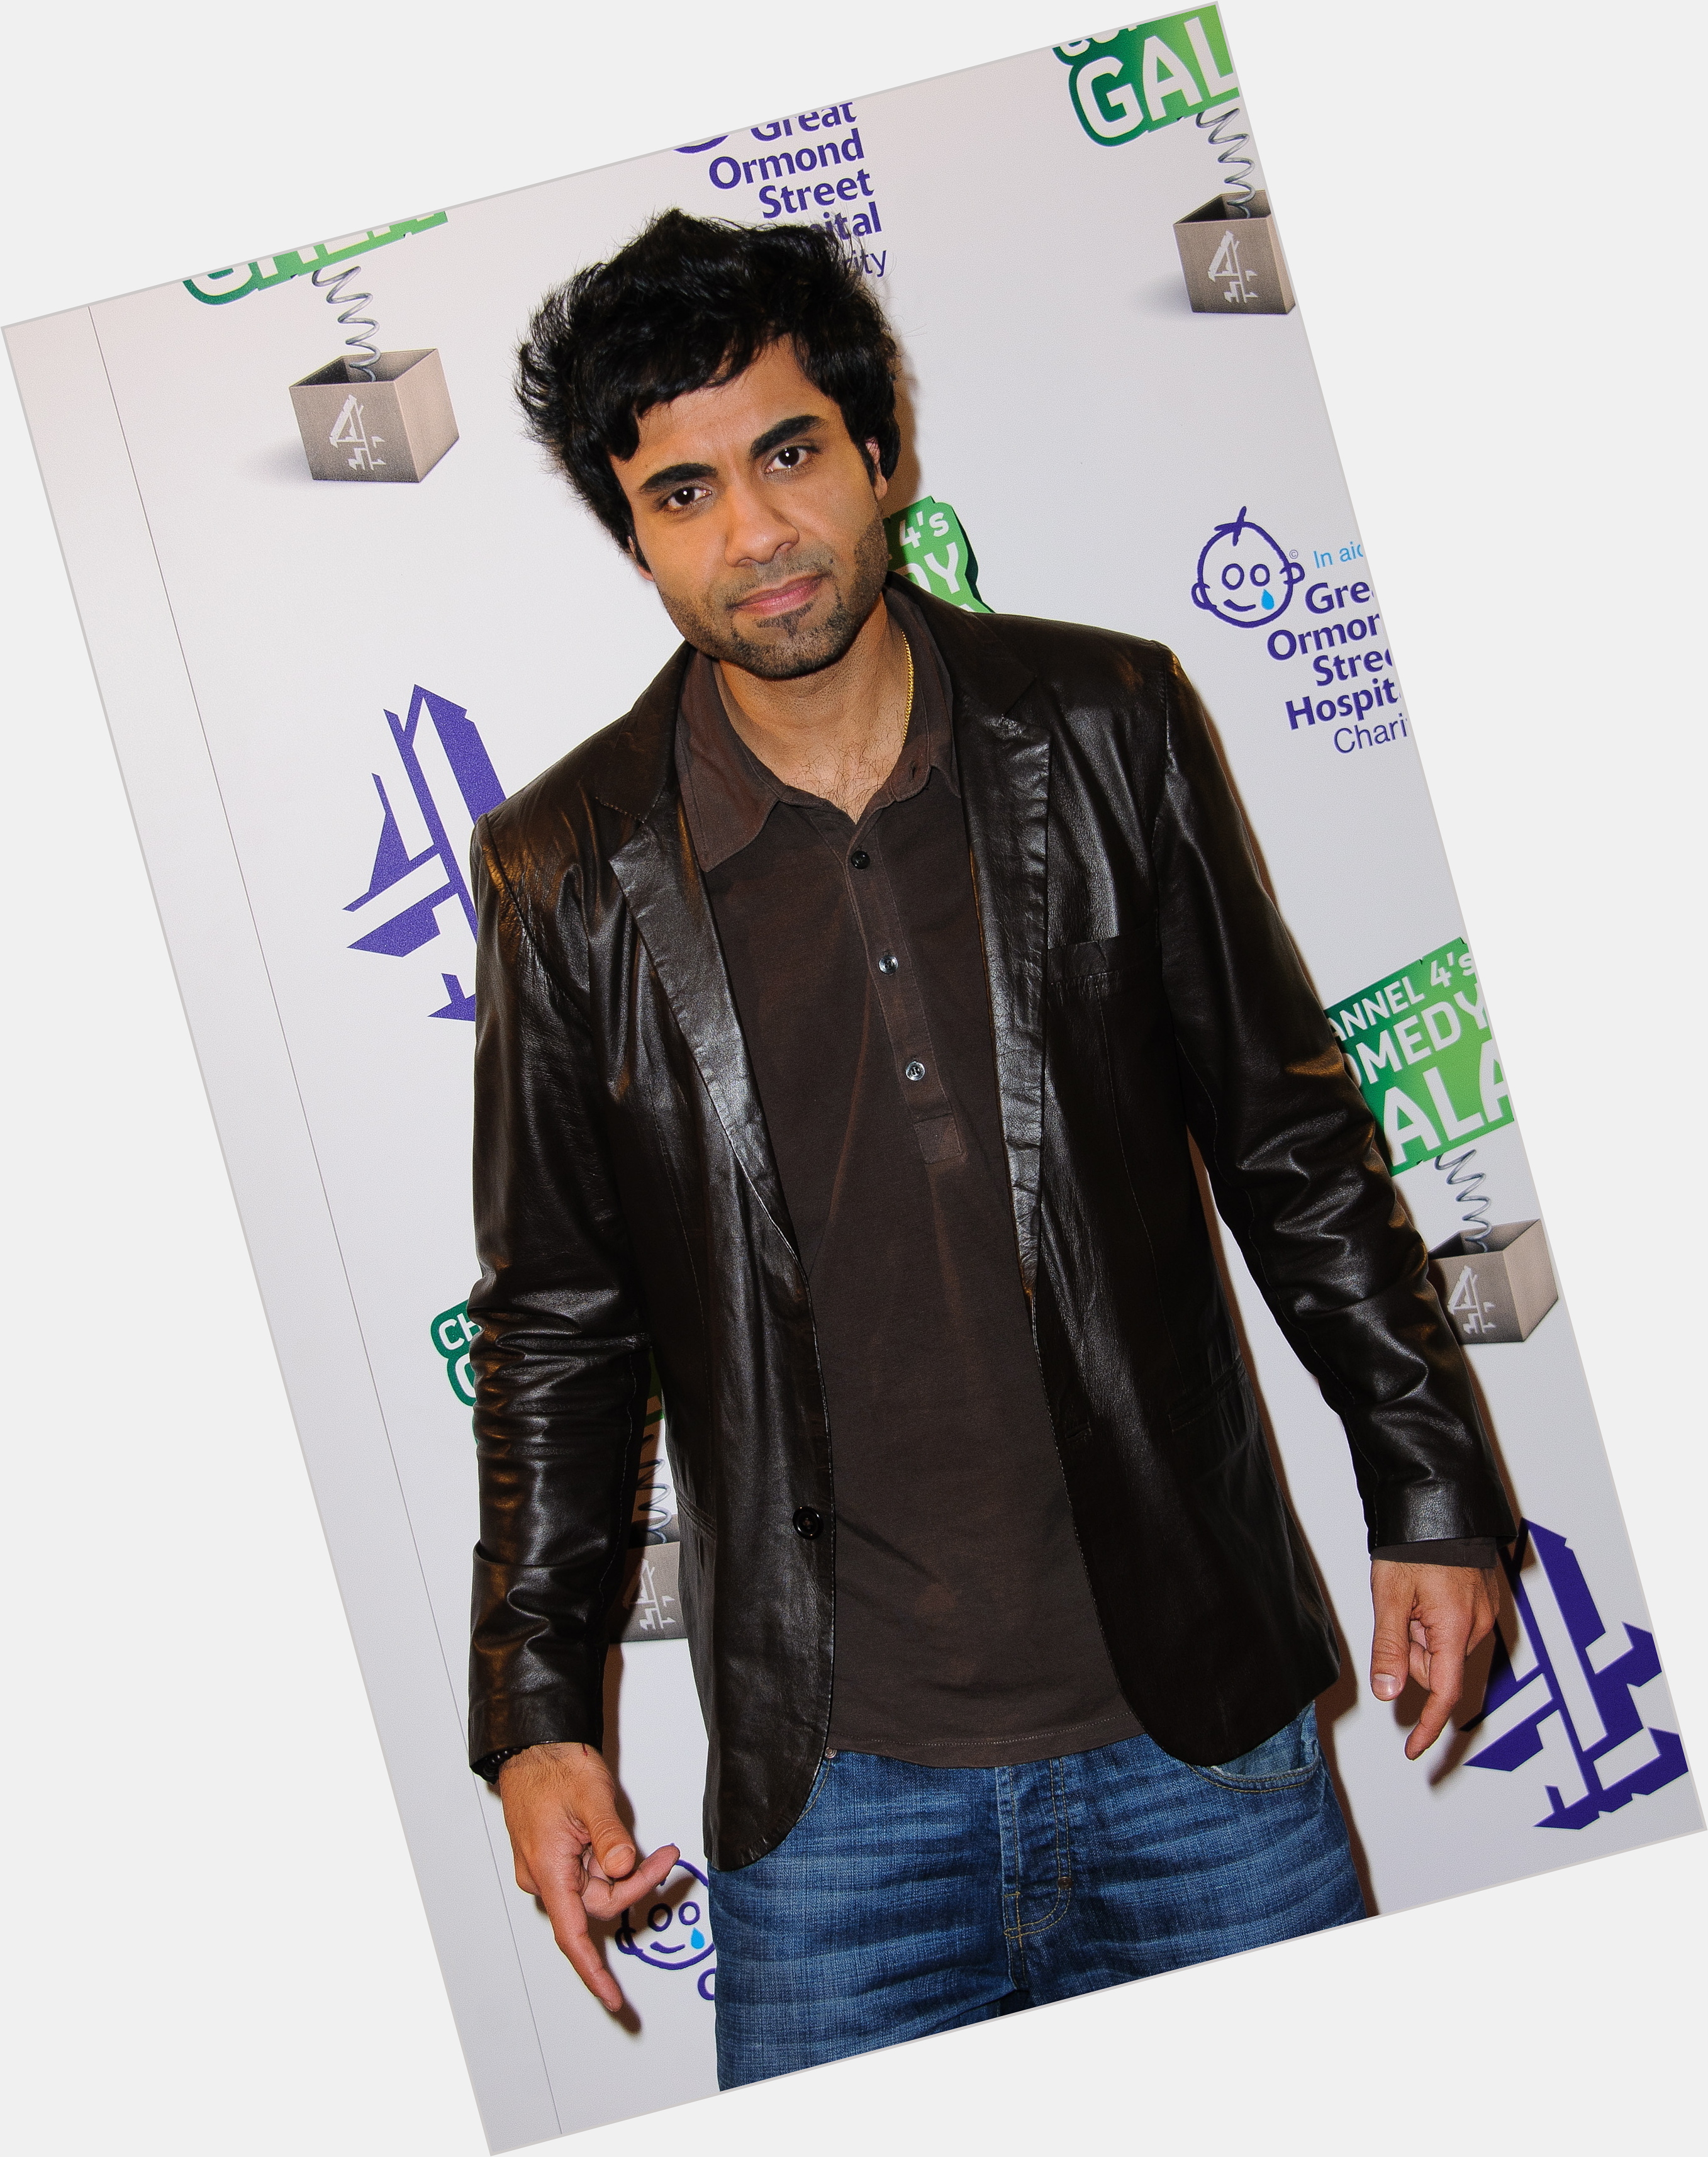 <a href="/hot-men/paul-chowdhry/is-he-married-where">Paul Chowdhry</a>  